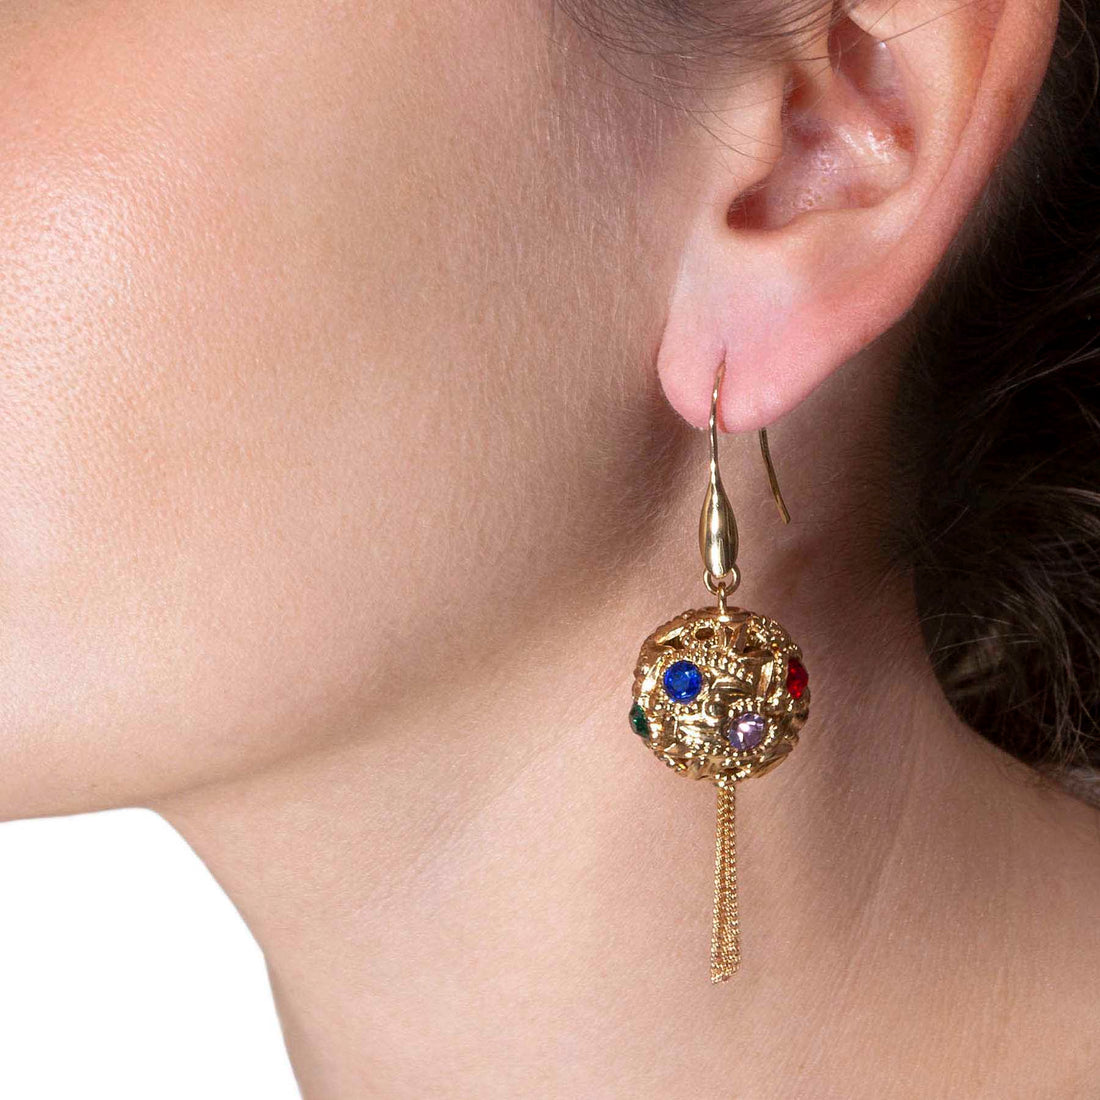 Dangle earrings with light points